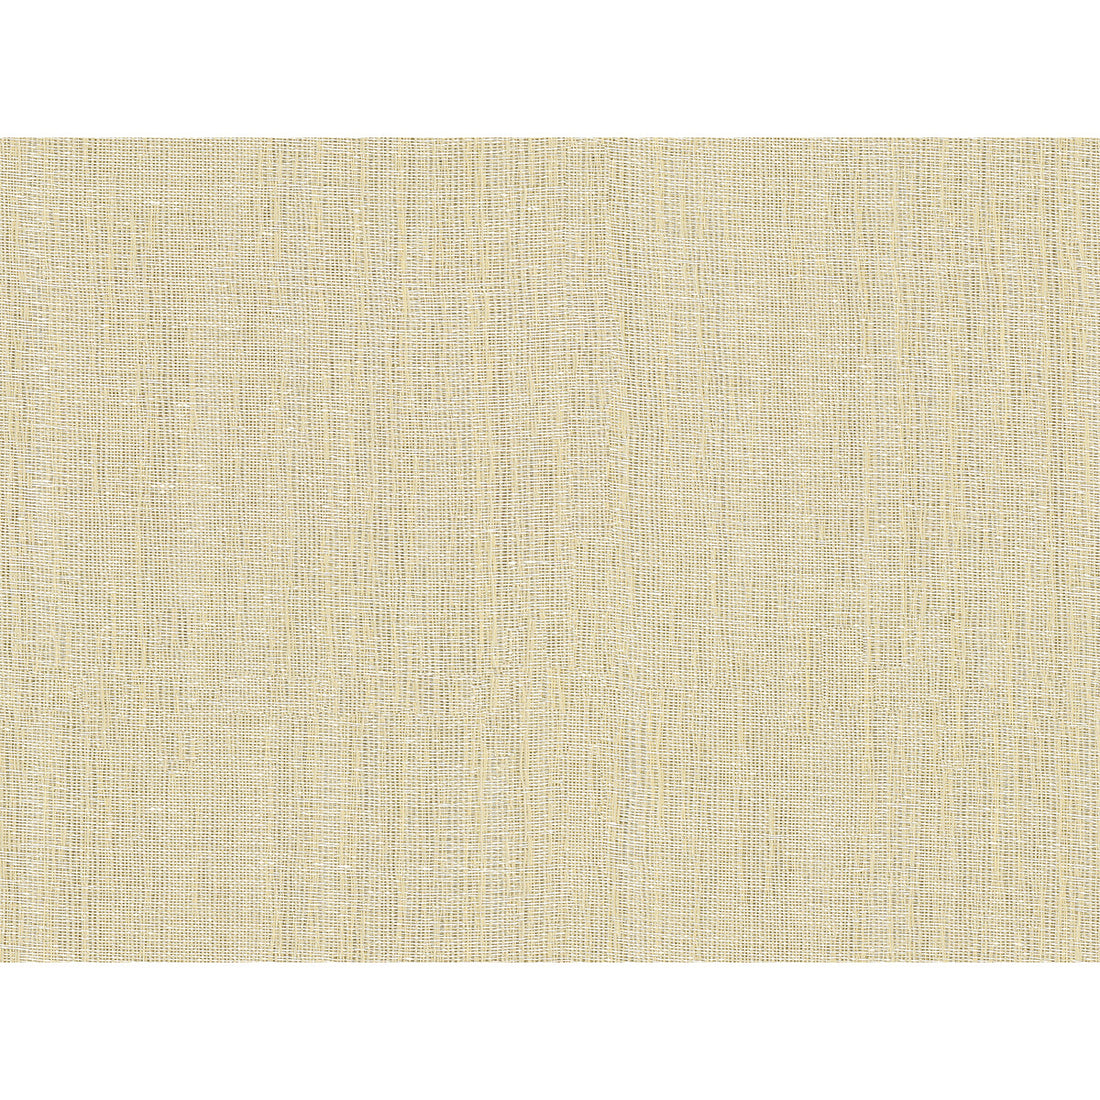 Kravet Contract fabric in 4537-1 color - pattern 4537.1.0 - by Kravet Contract